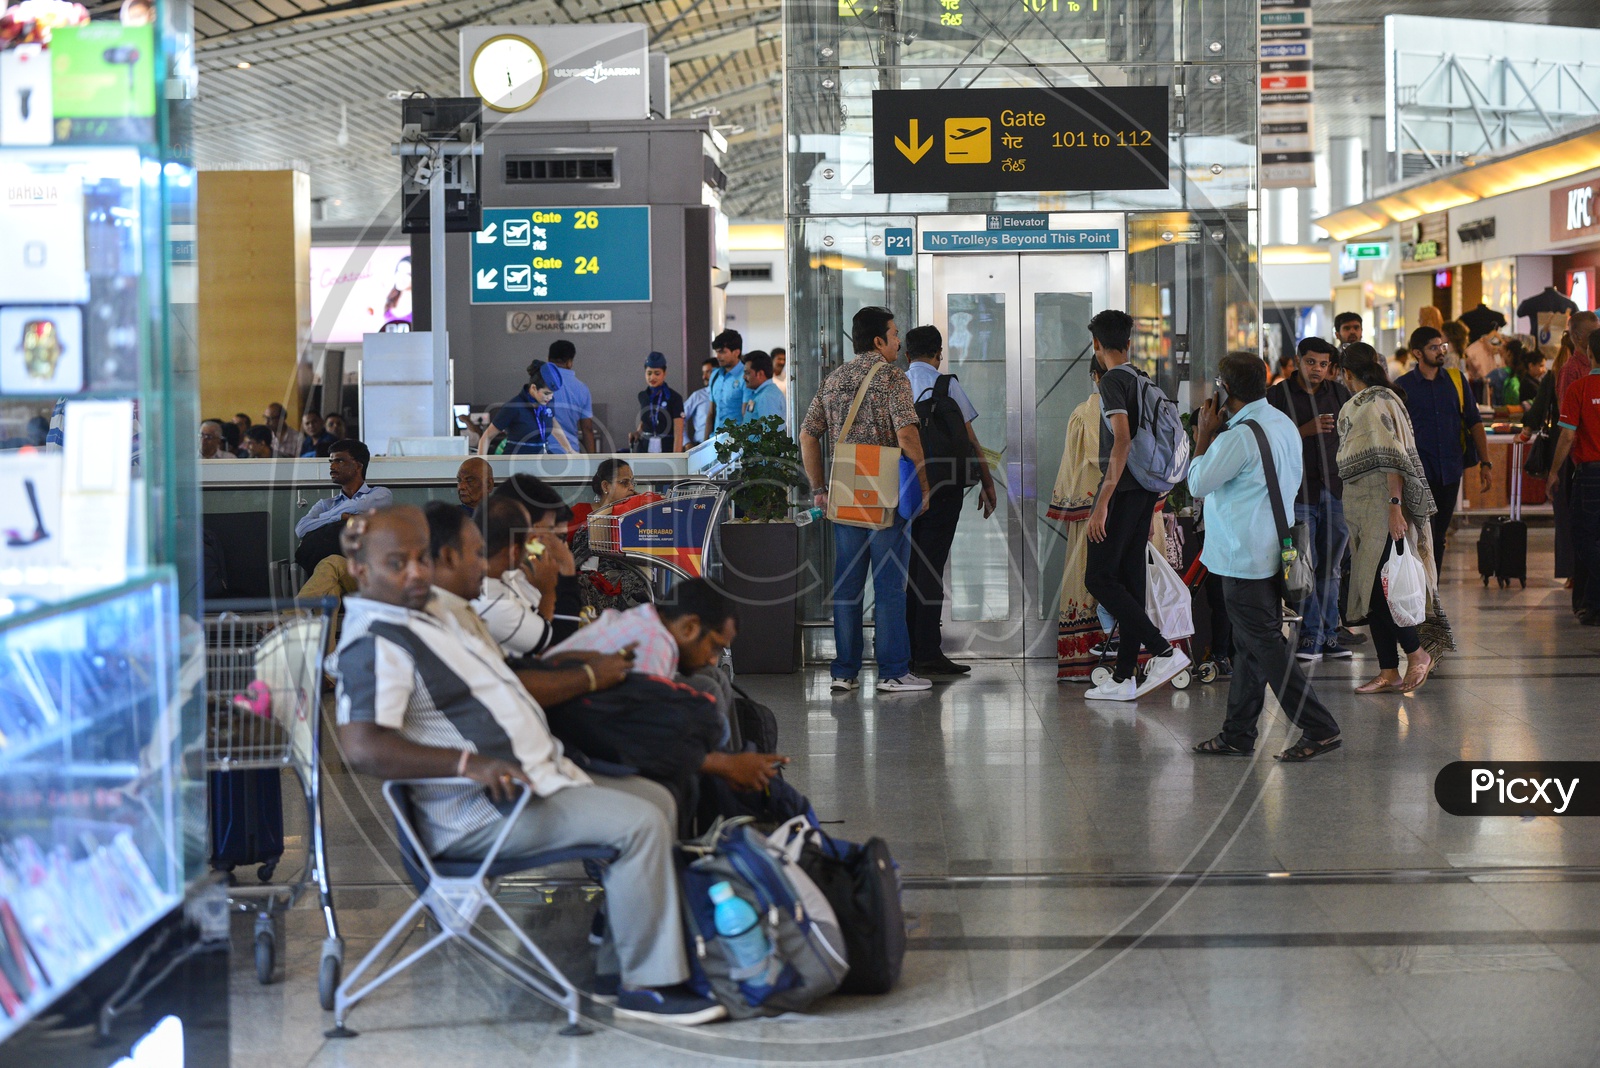 Airport scenes  With Passengers Waiting In  Waiting Lounge  And Departure Display  Screens